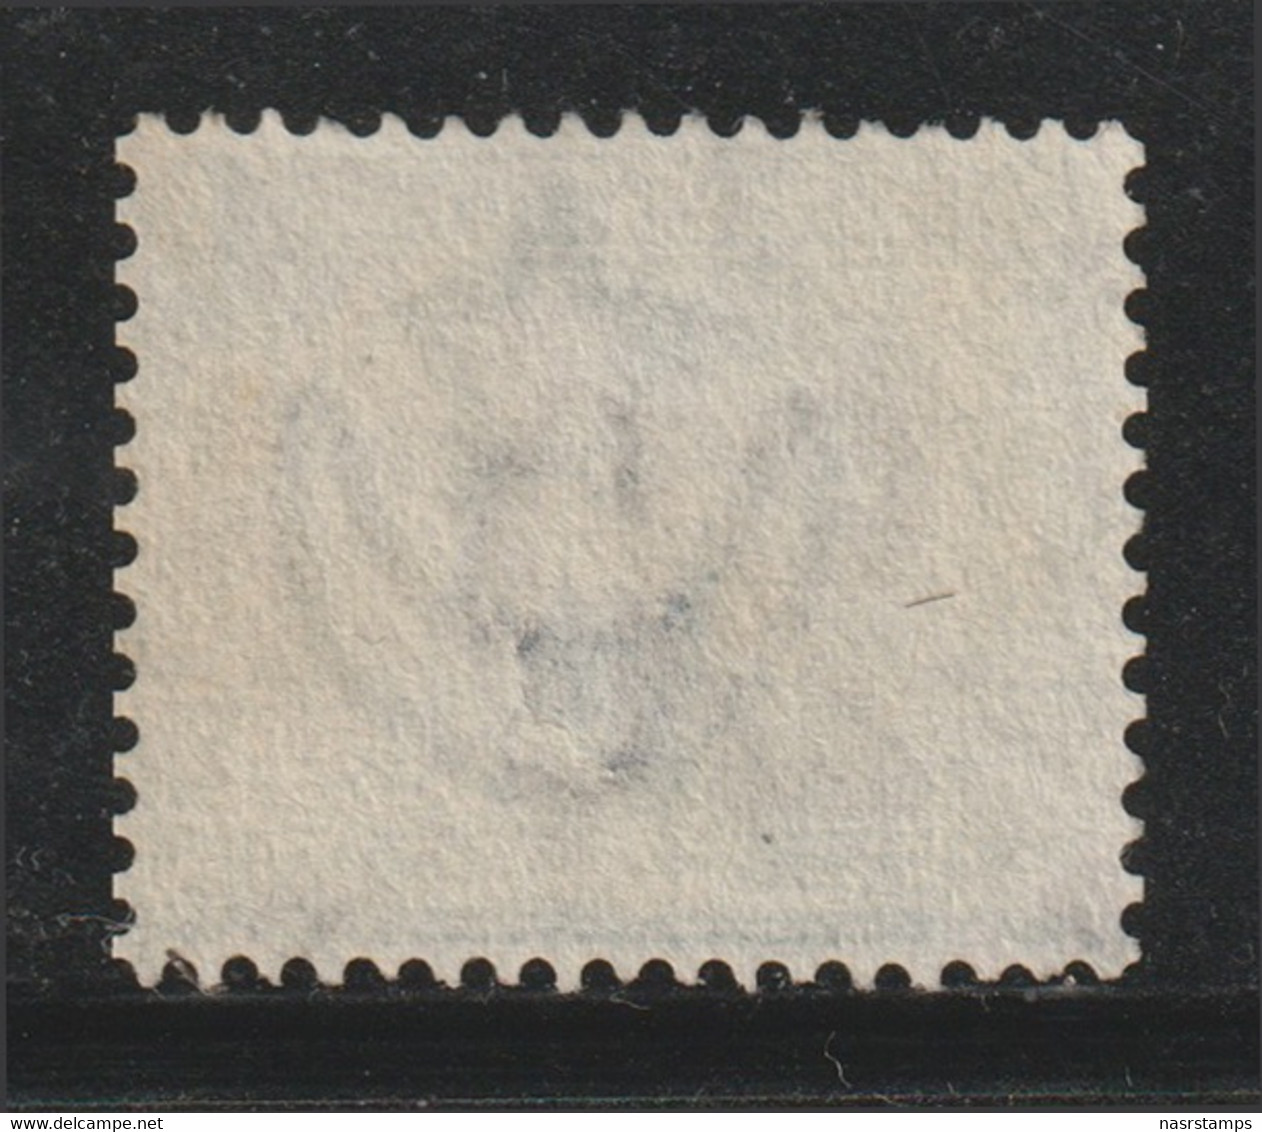 Egypt - 1884 - Rare - Shifted Overprint - ( 20 Para On 5 Piasters ) - No Gum - Used - 1866-1914 Khedivate Of Egypt